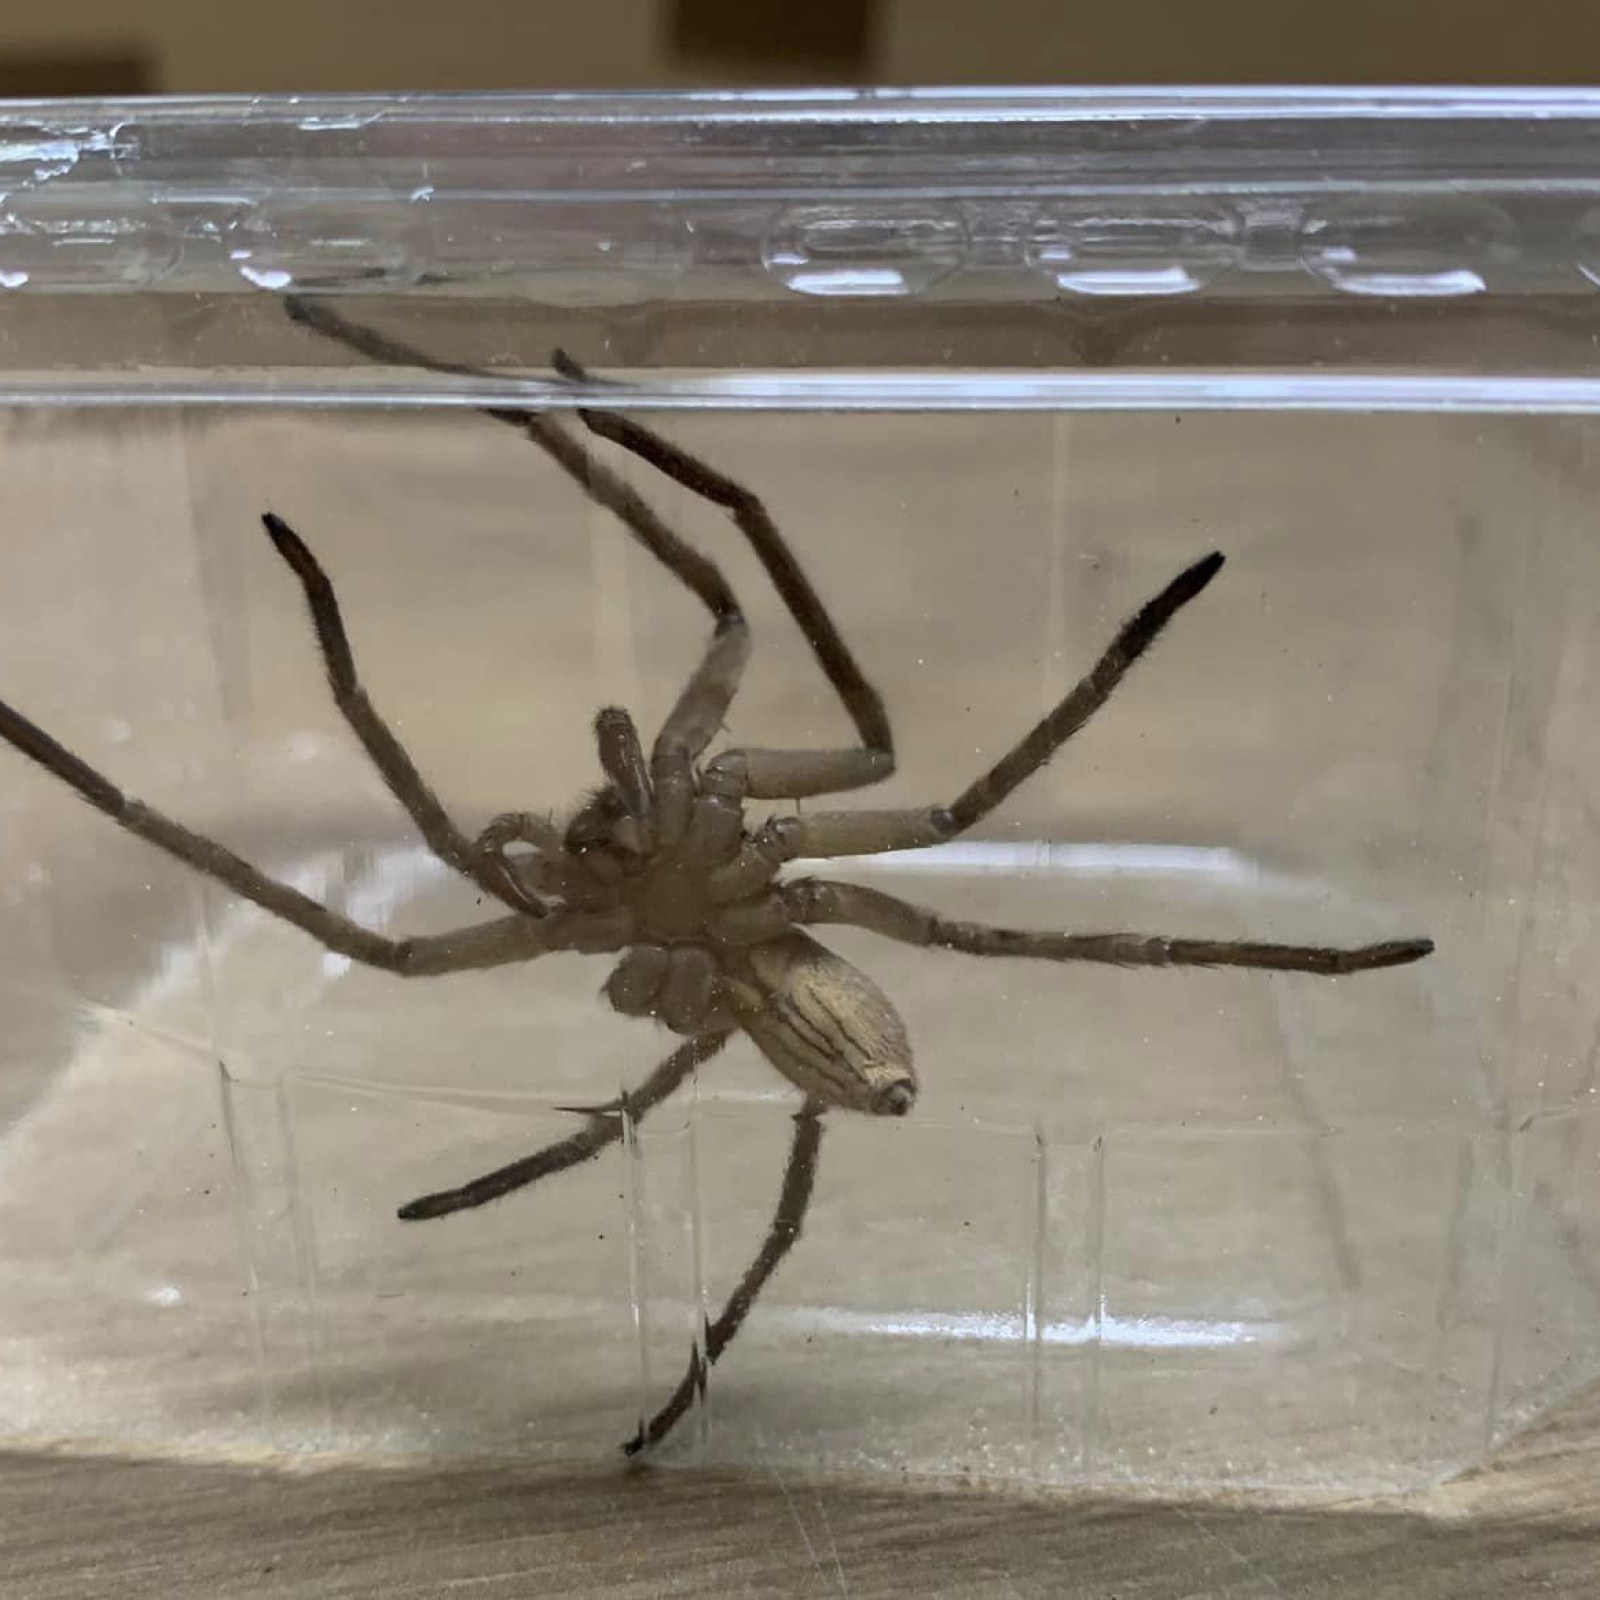 Enormous Spider With Very Nasty Bite Found in Bananas at Grocery Store